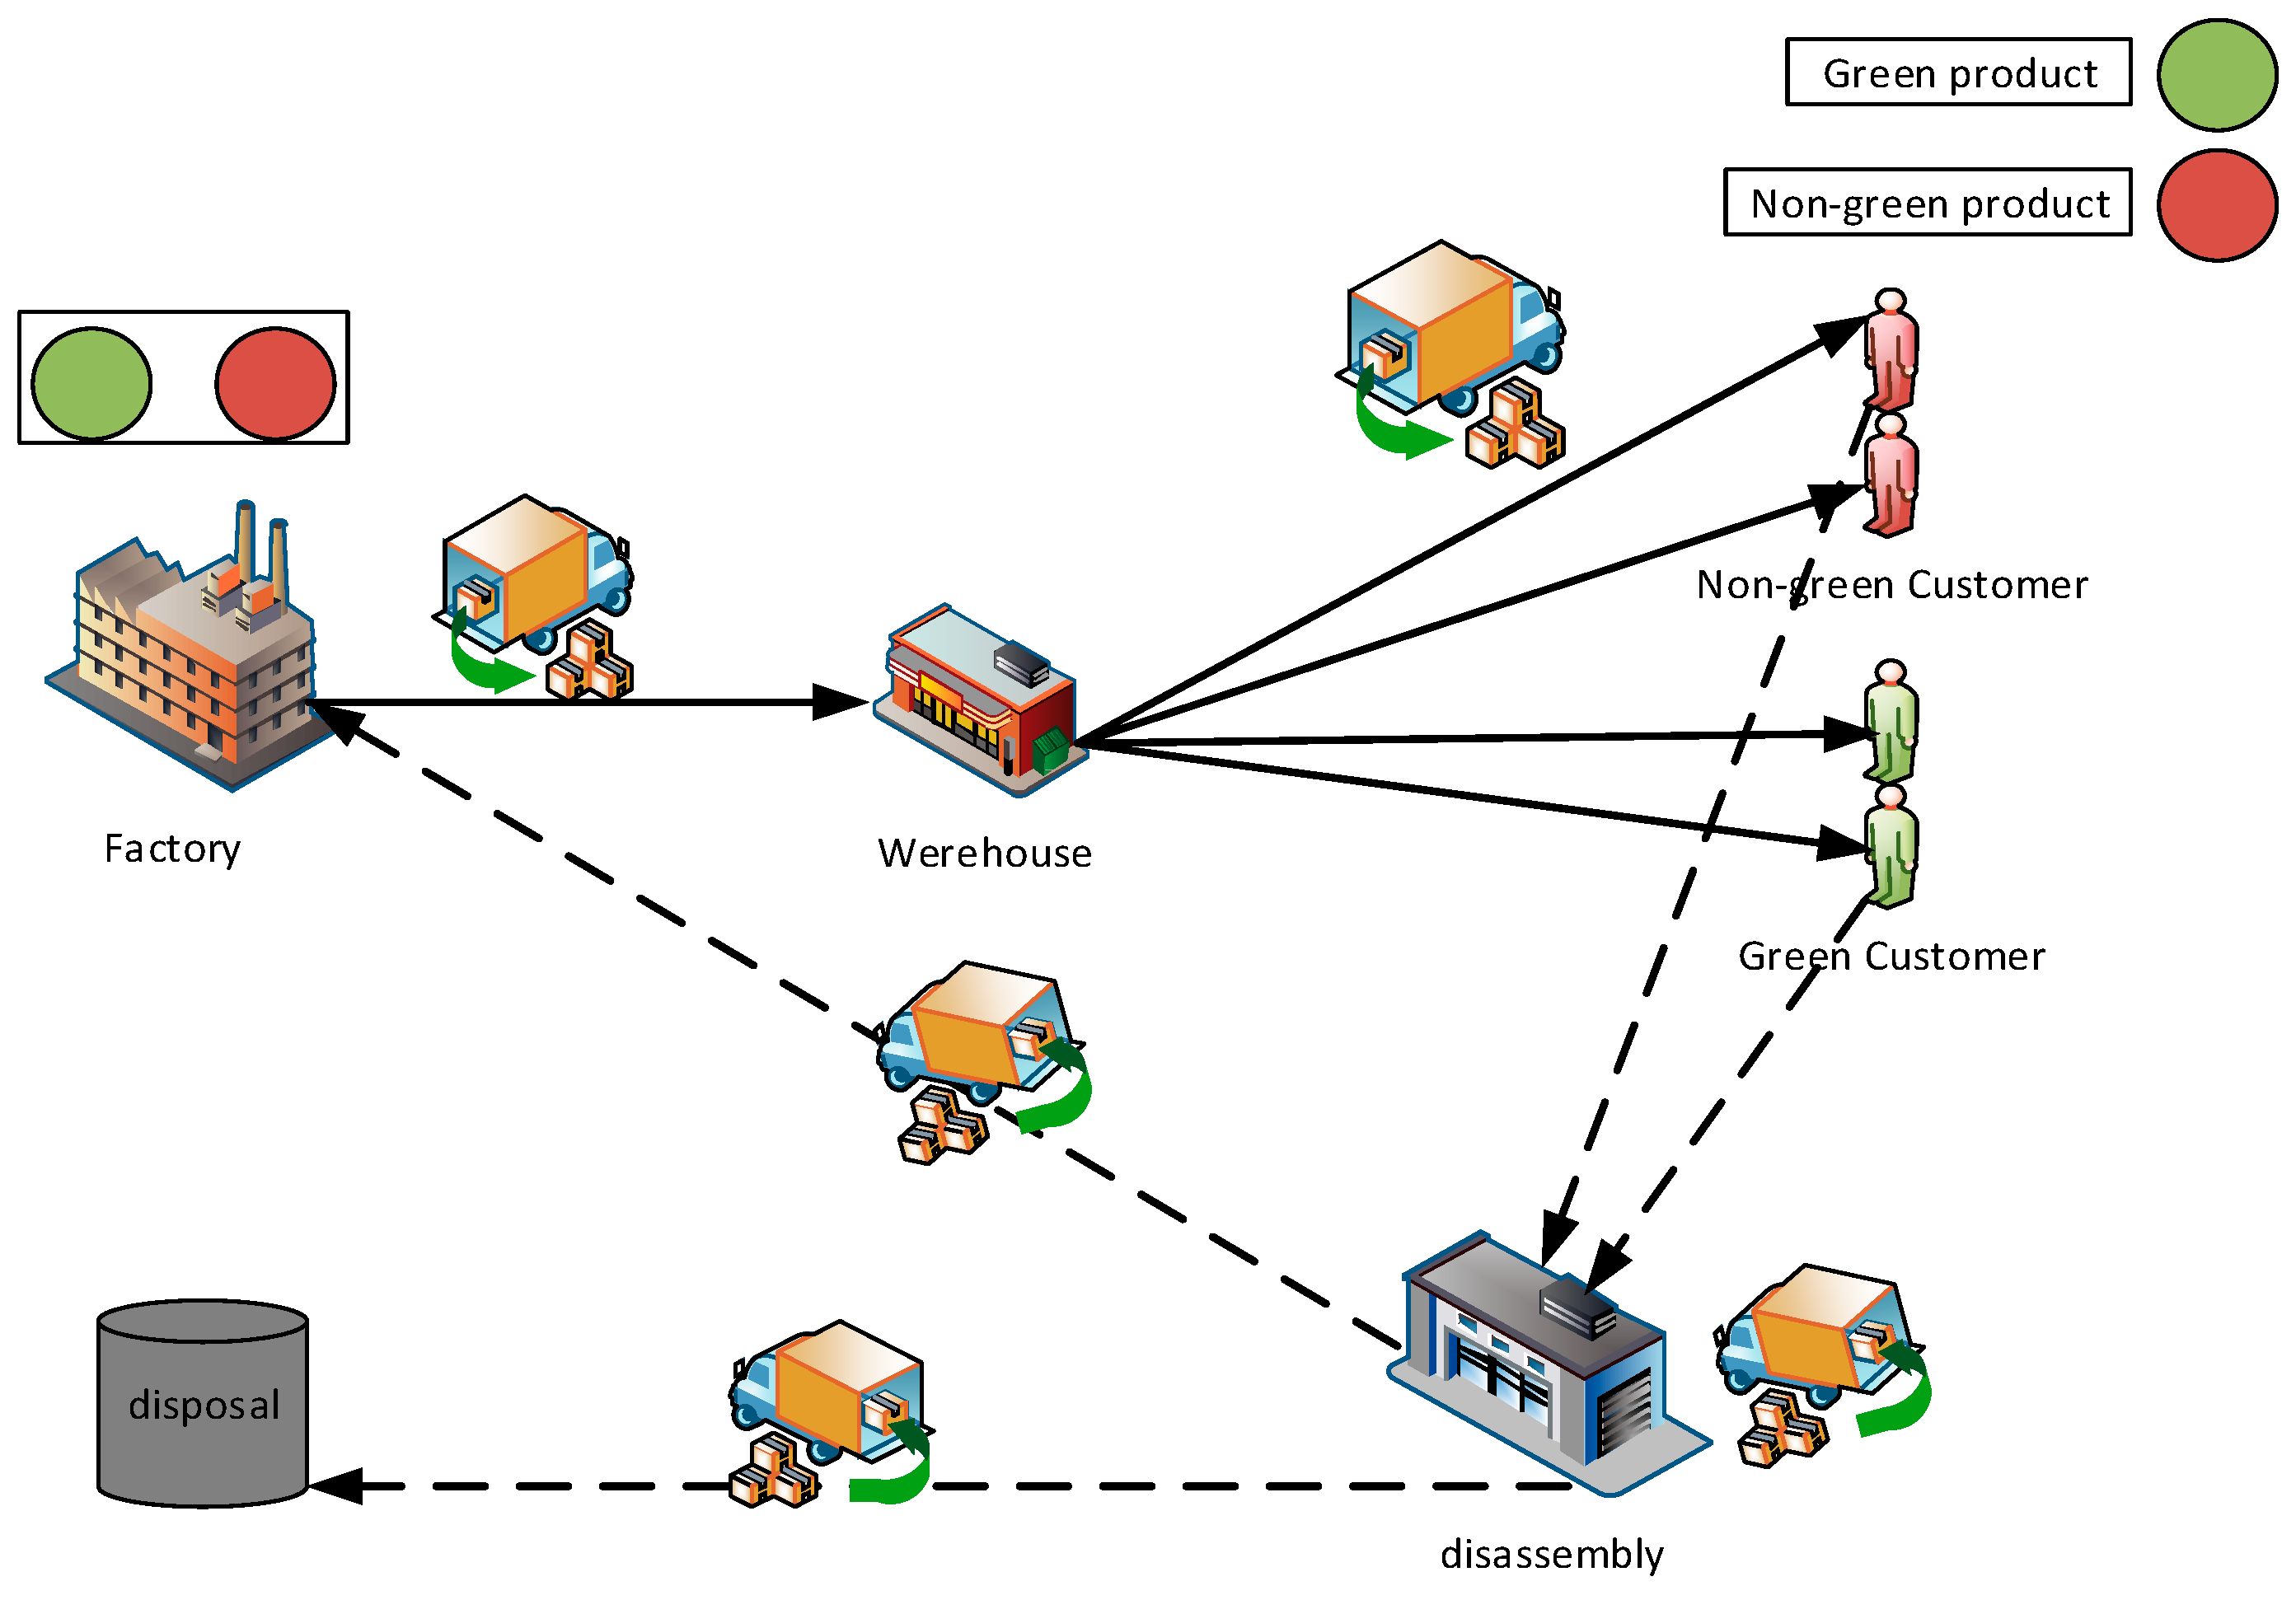 Arena simulation model for closed loop supply chain network for spent